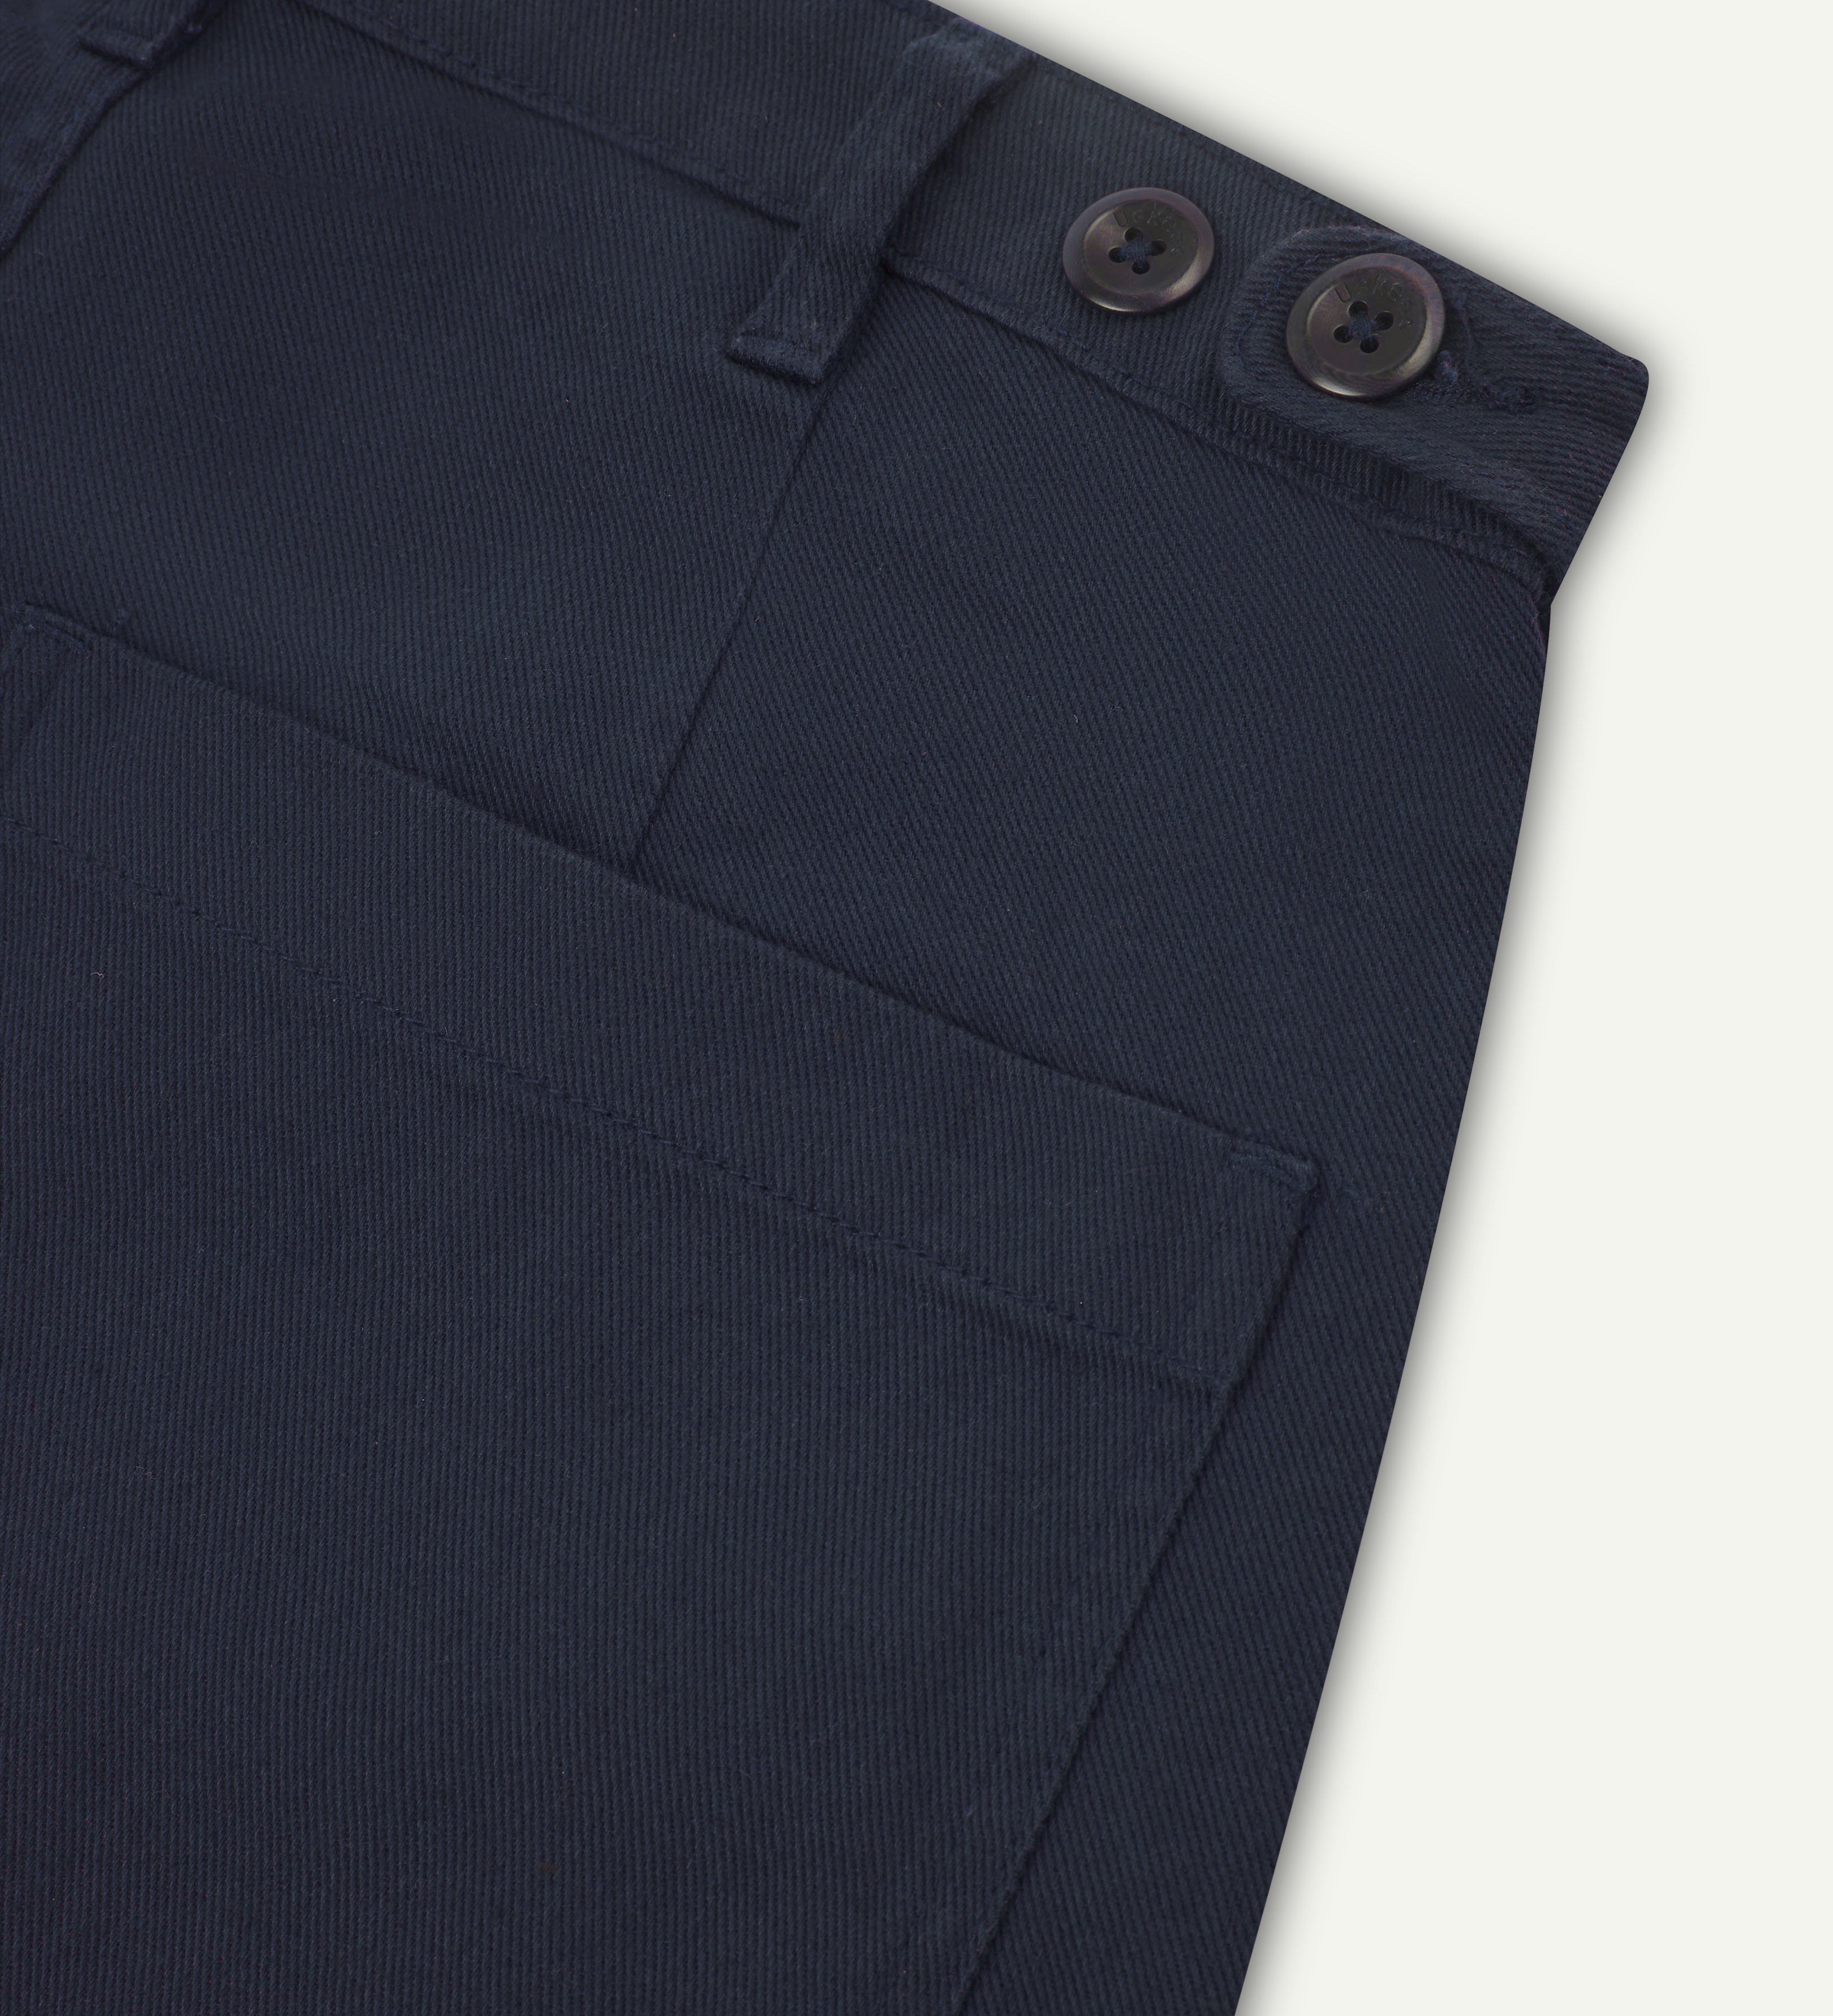 Close up shot of dark blue drill trousers from uskees showing back pocket and waist band button adjusters